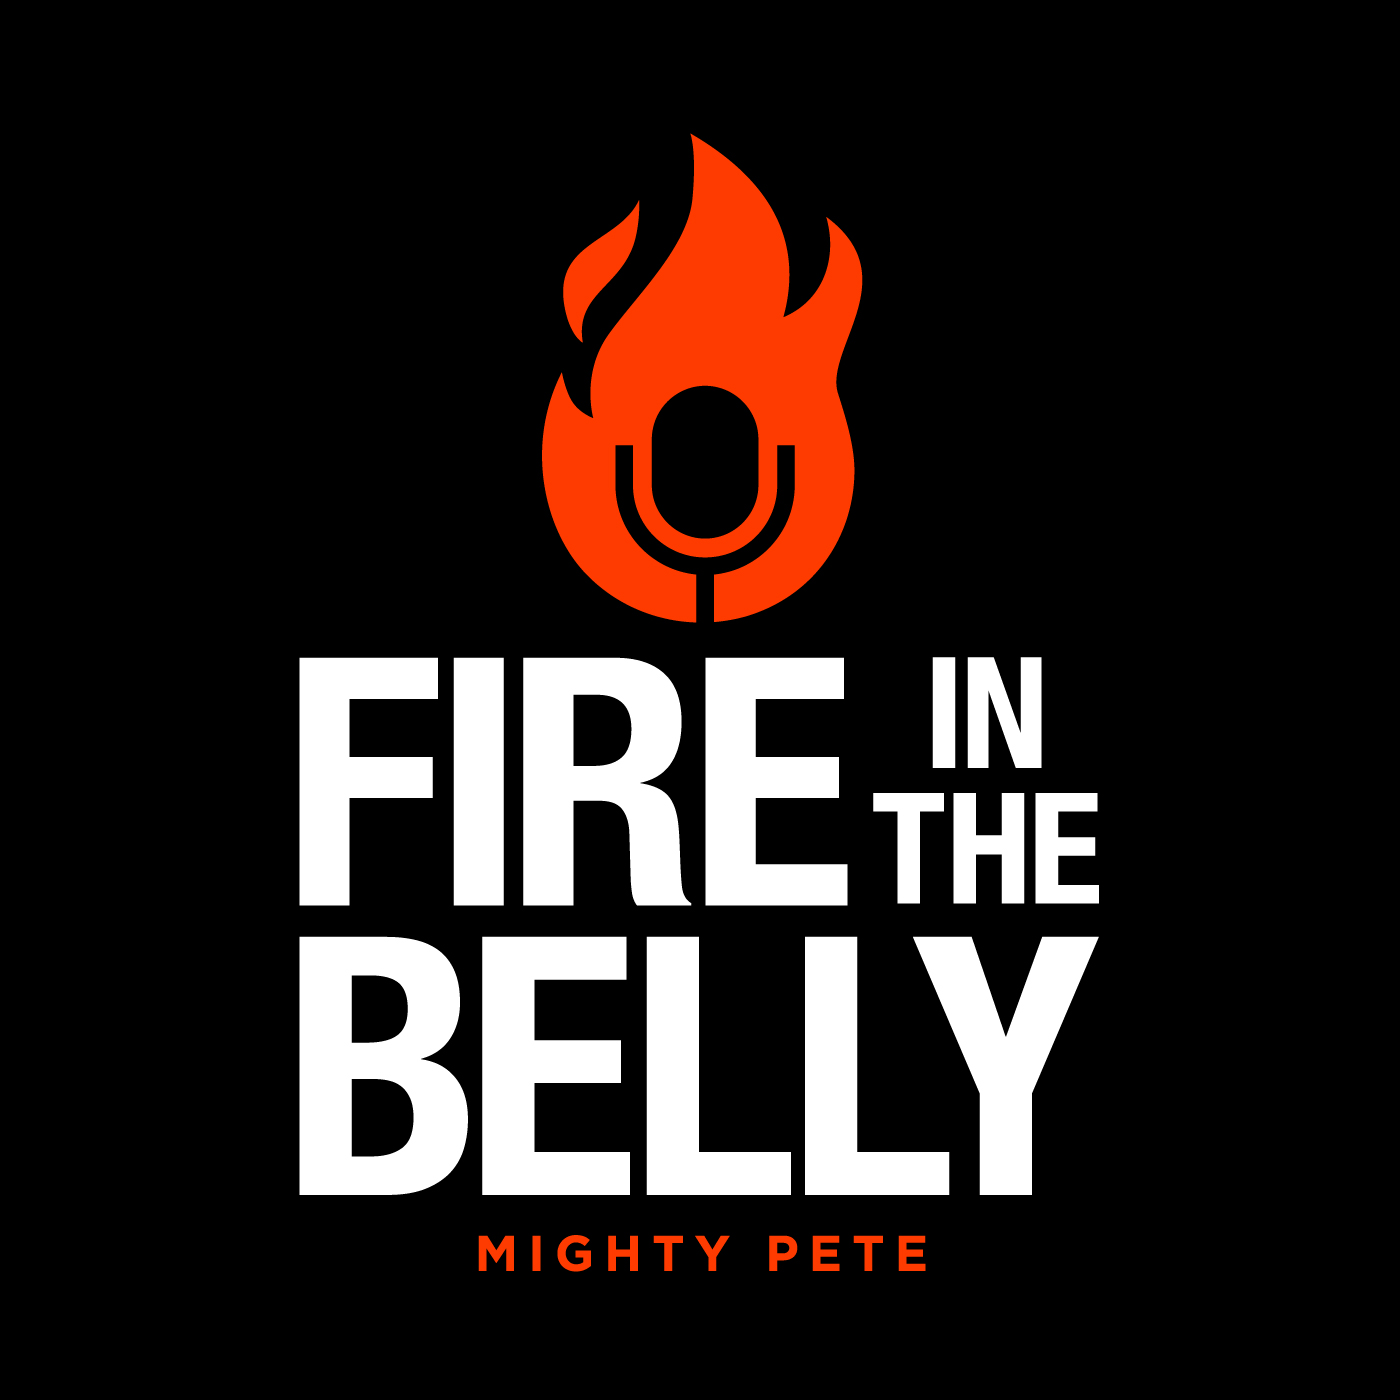 Who is Mighty Pete? Interview with Pat Slattery